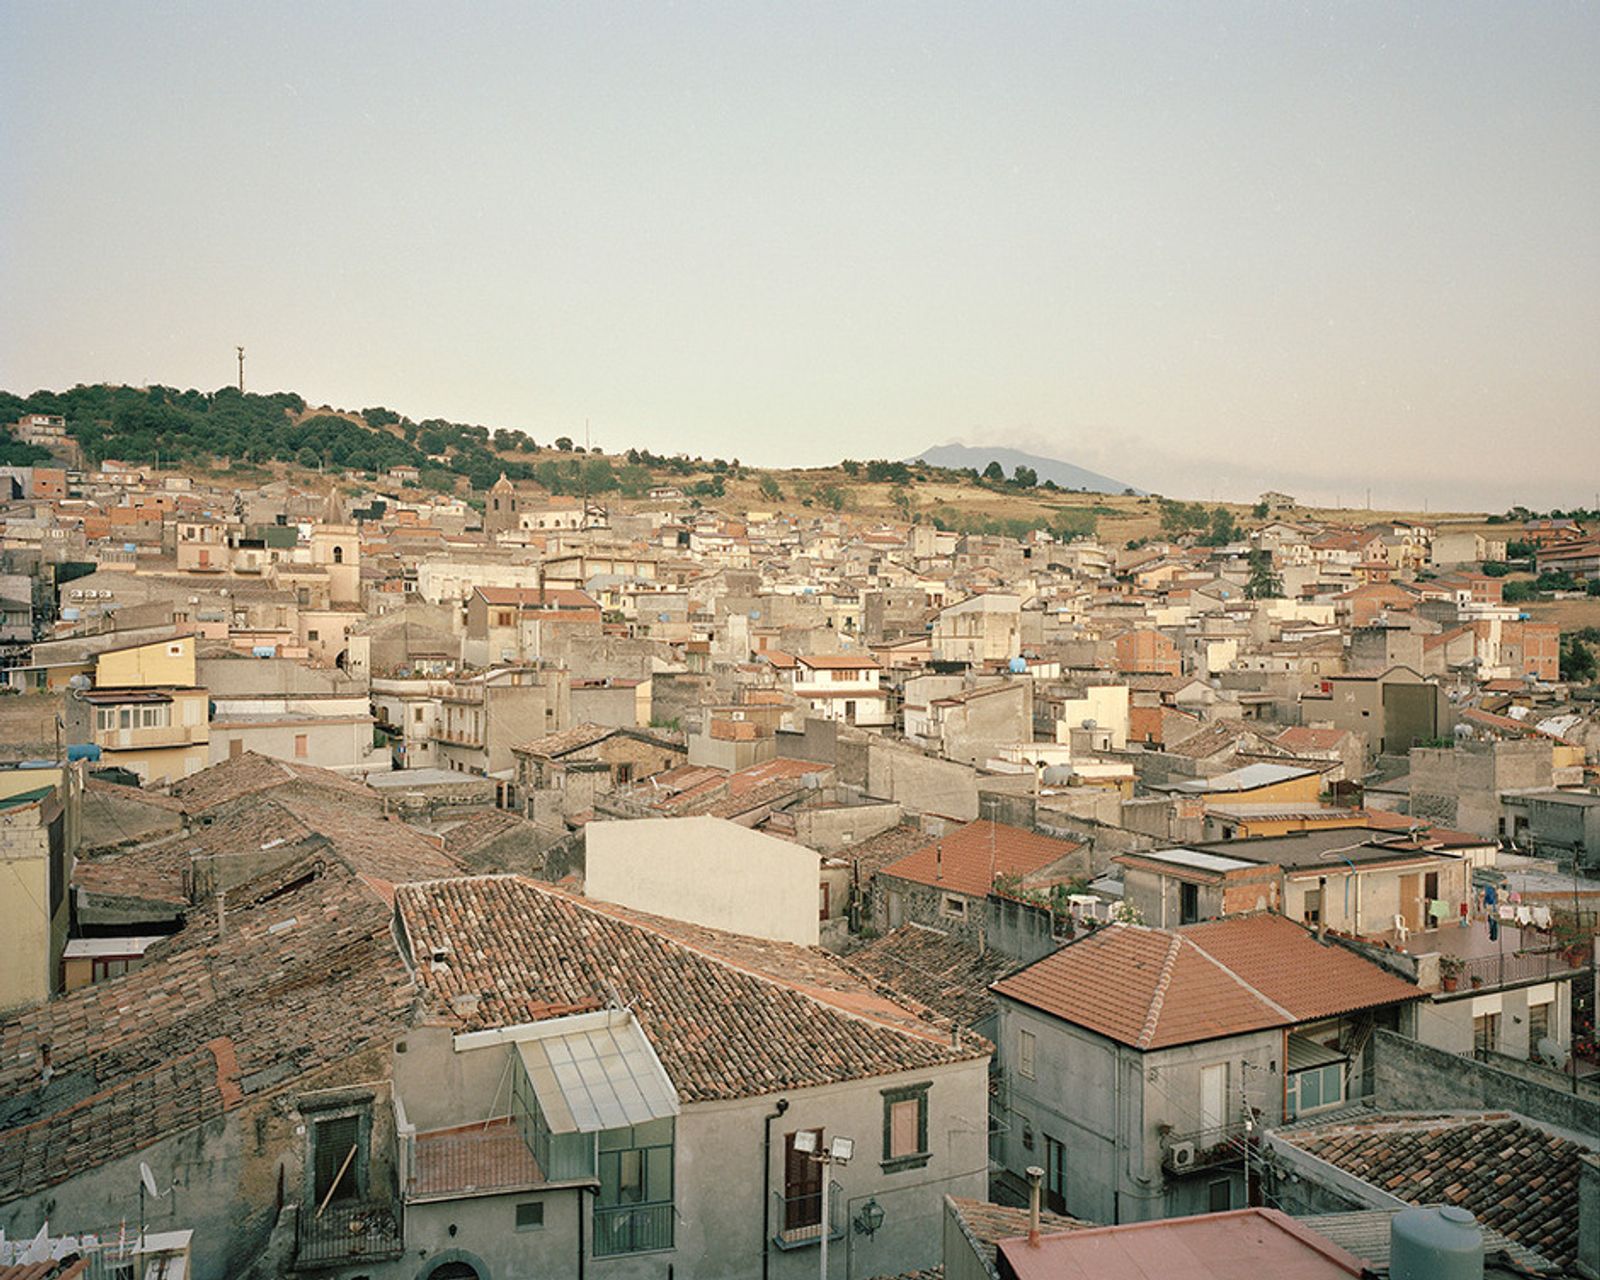 © Maria Vittoria Trovato - Image from the Etna photography project